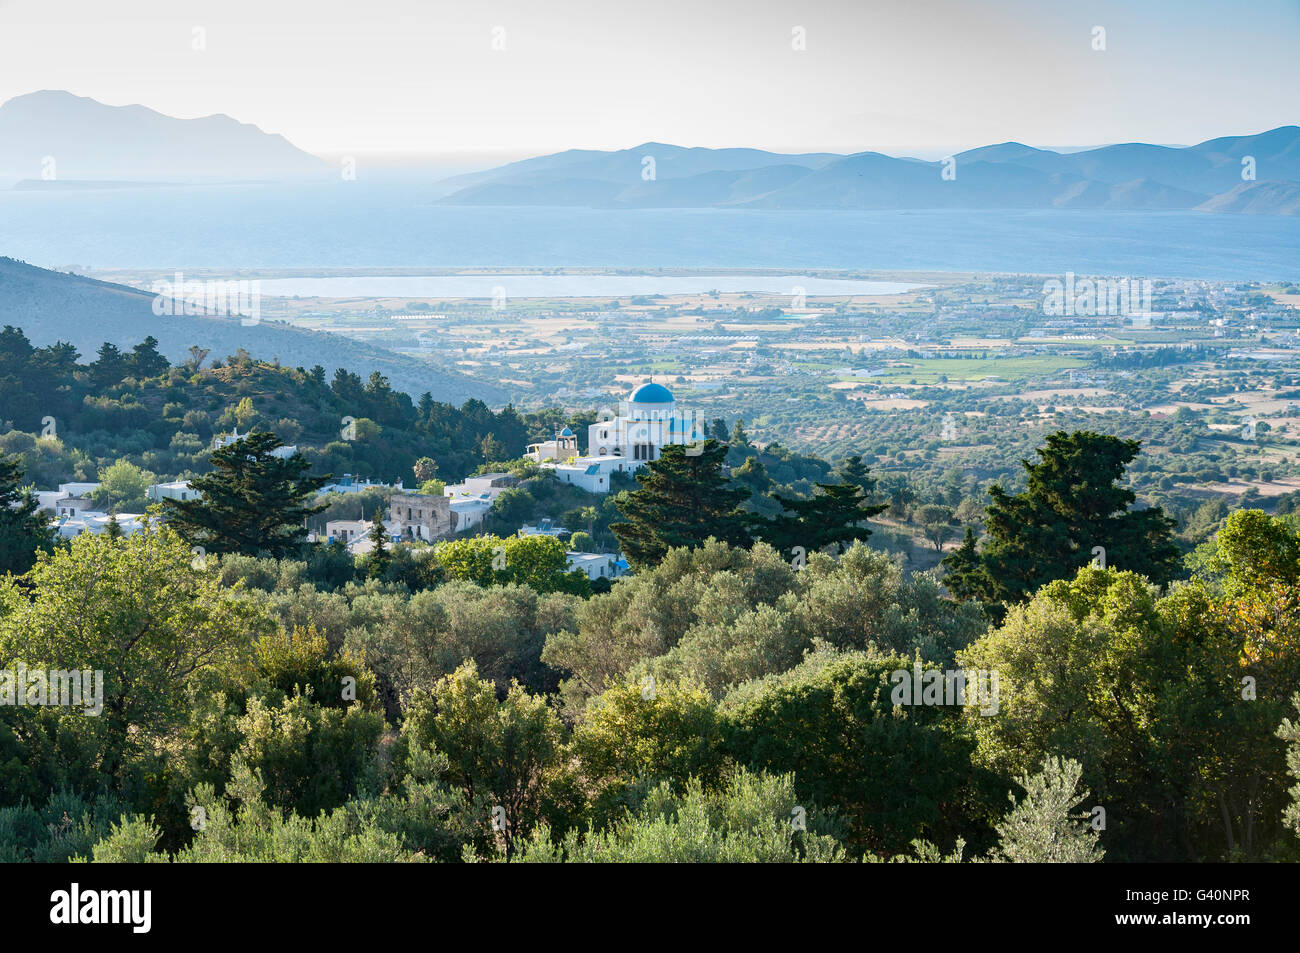 Landscape village view from Zia hillside village, Kos (Cos), The Dodecanese, South Aegean Region, Greece Stock Photo